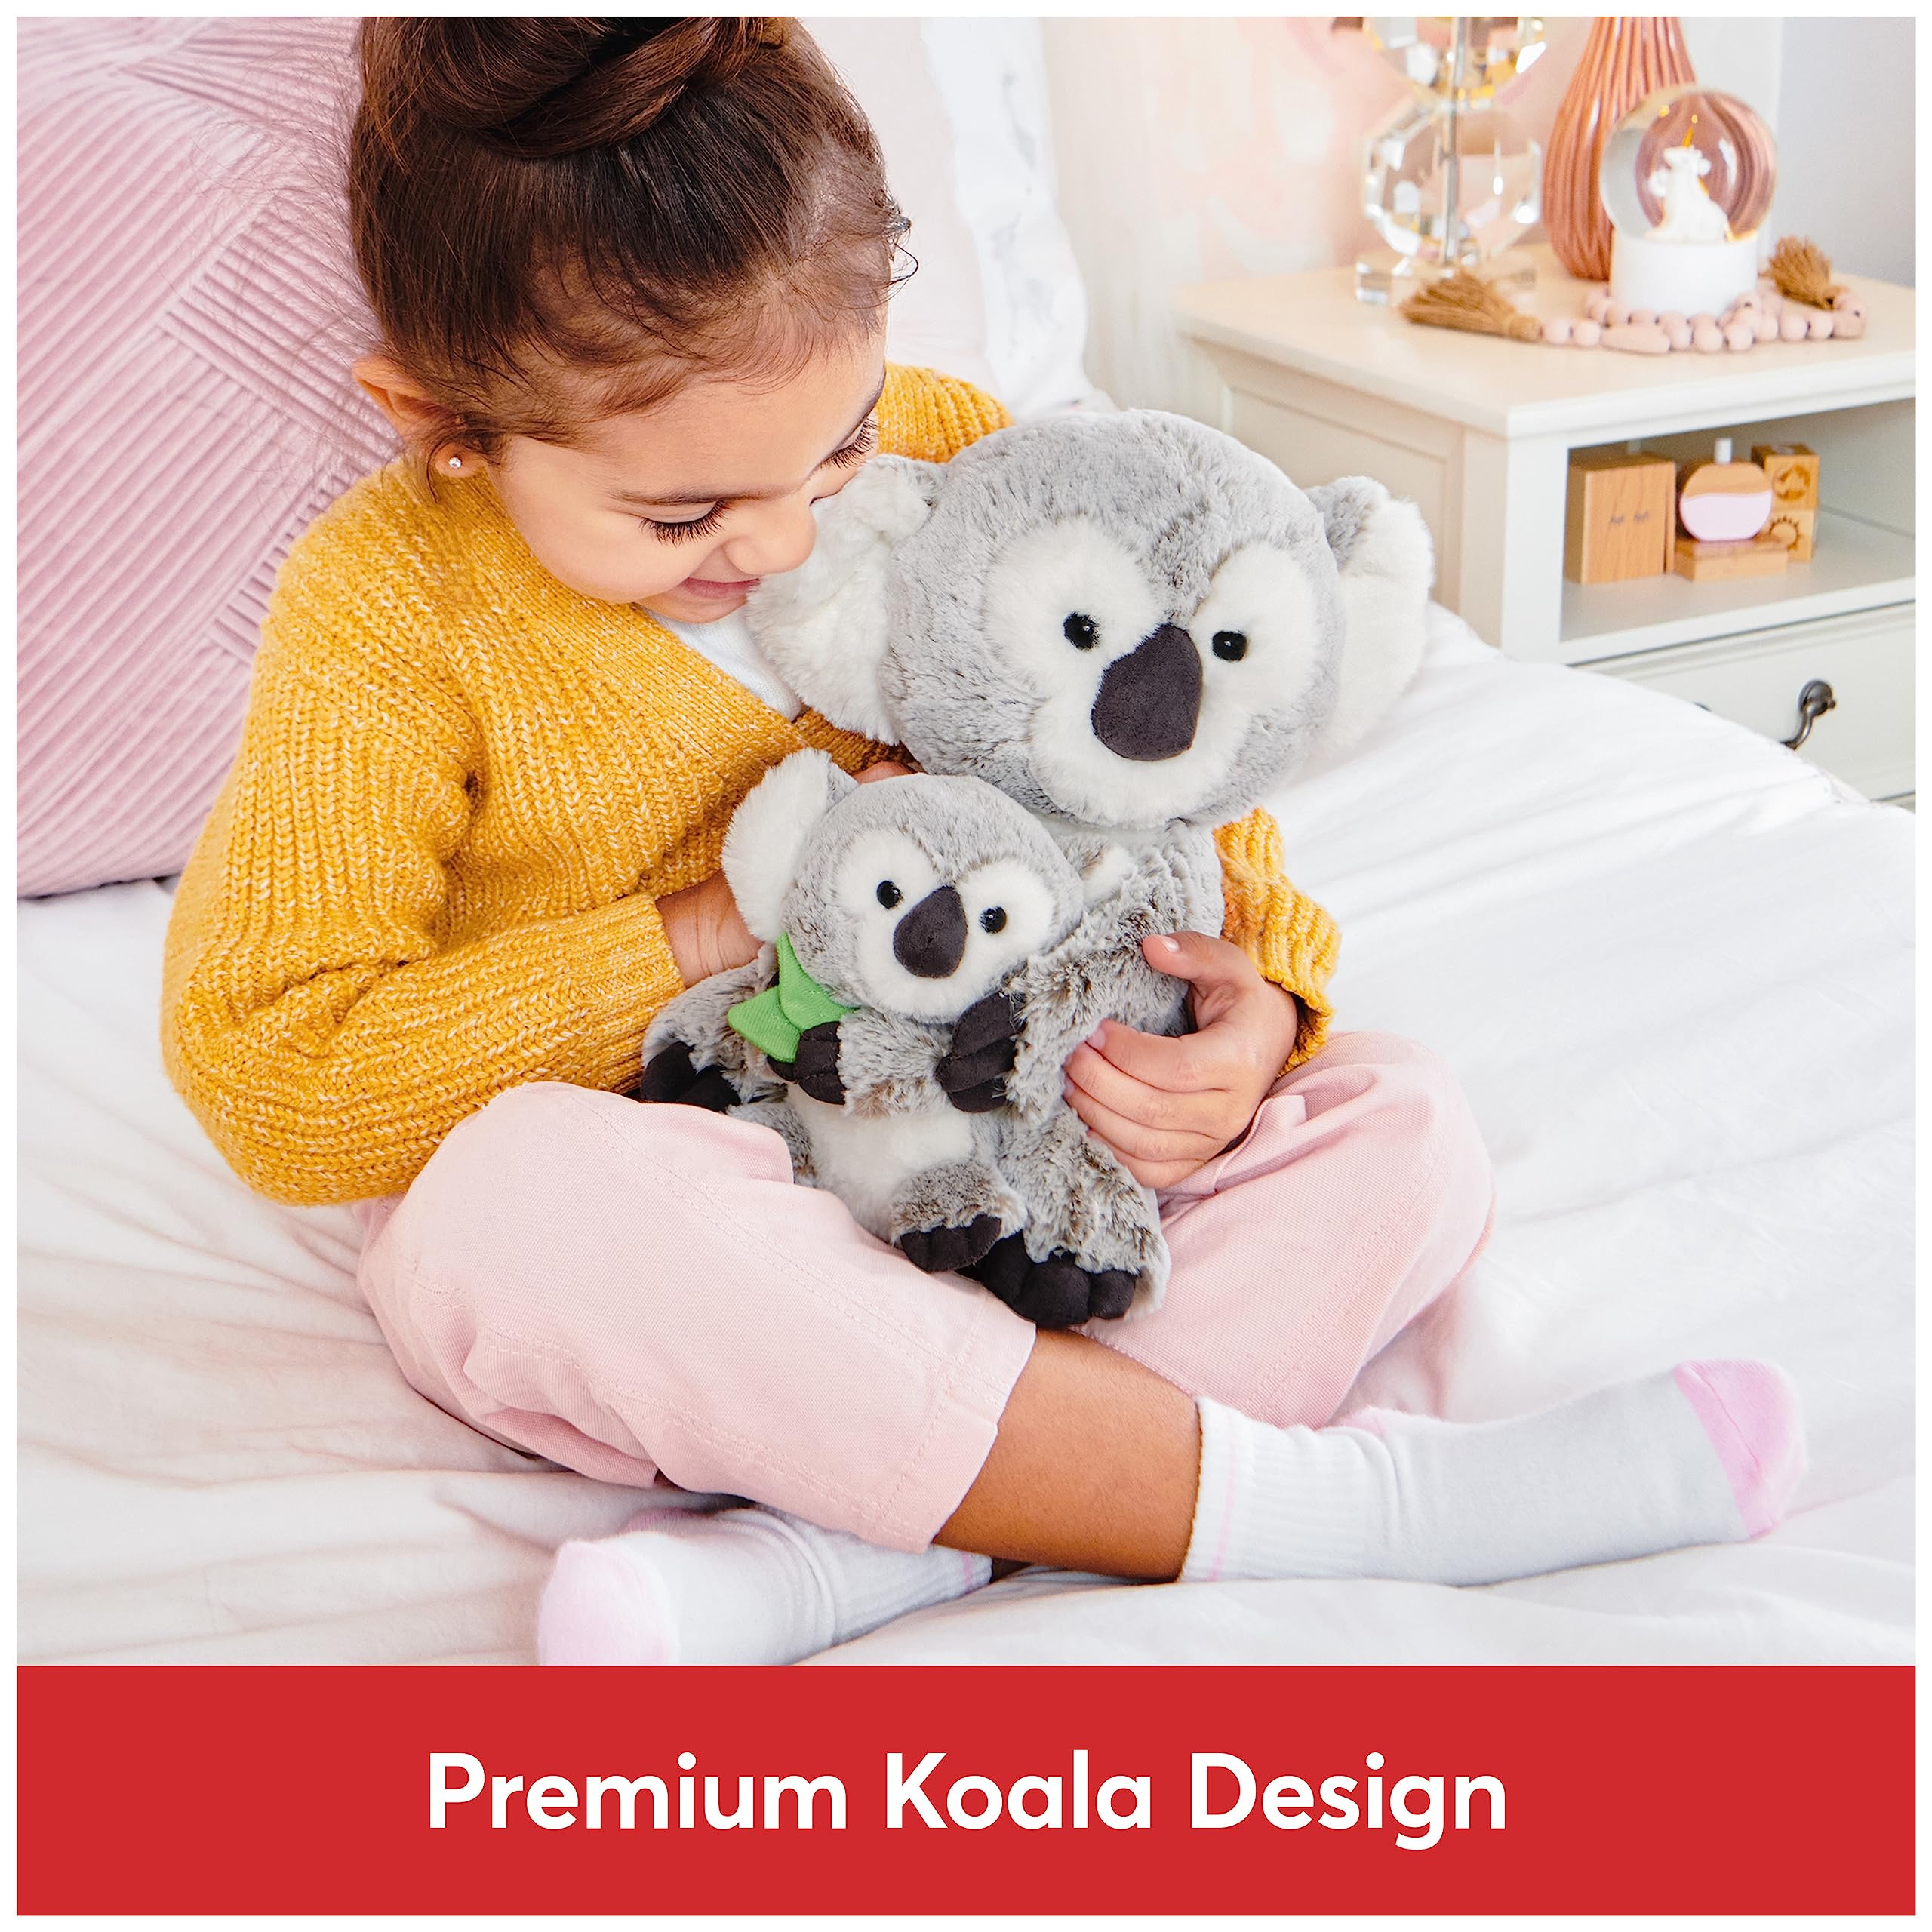 GUND Zozo The Koala Bear with Joey Plush, Stuffed Animal for Ages 1 and Up, Gray/White, 10”